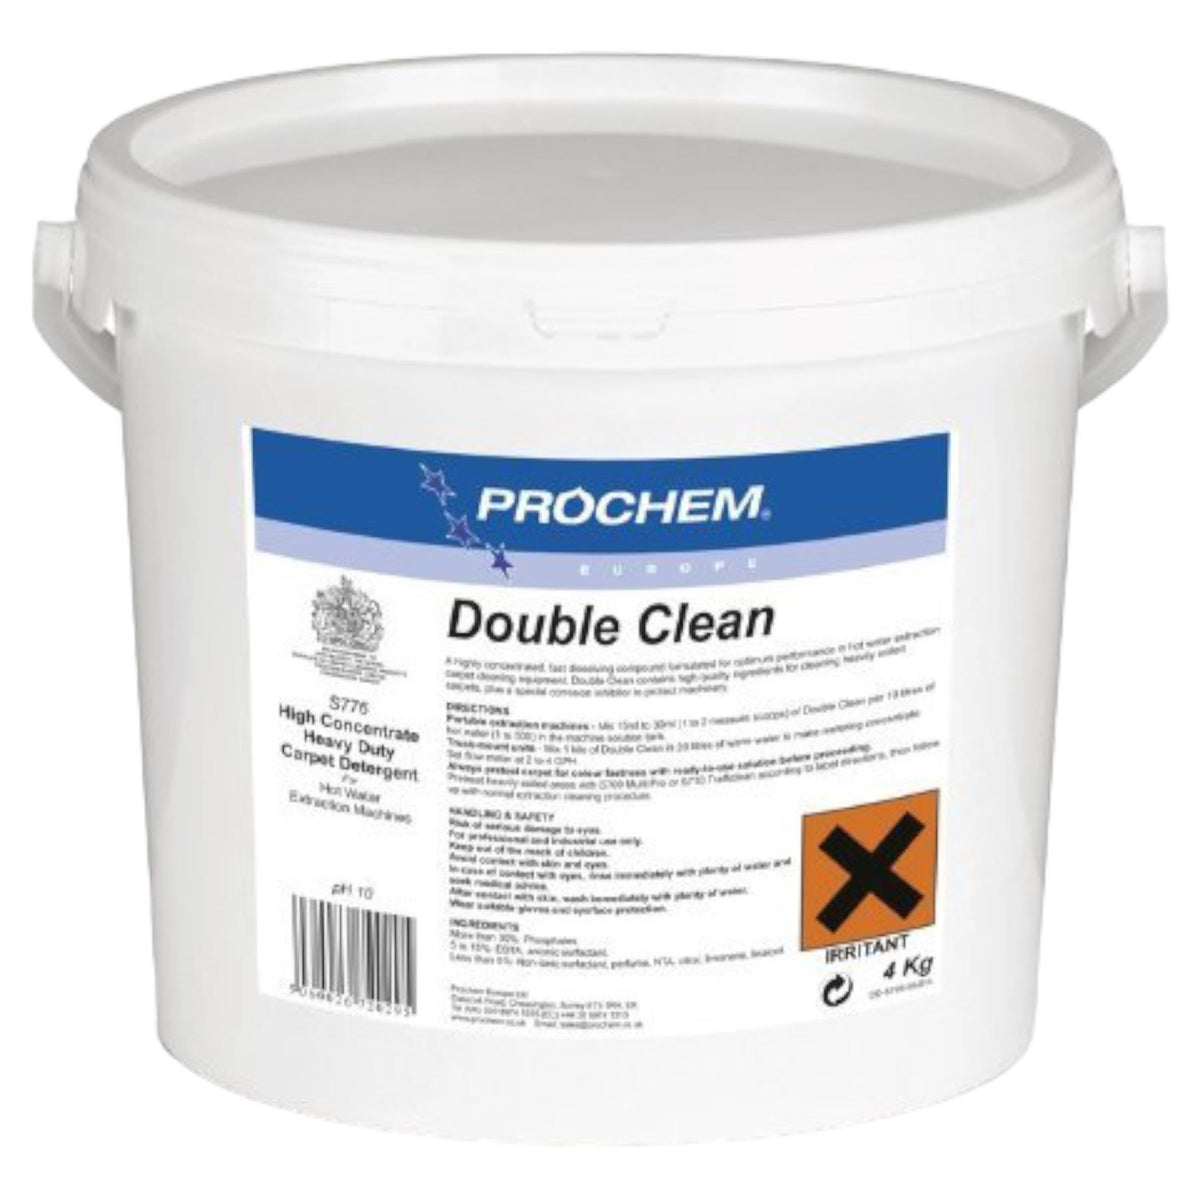 Prochem Double Clean 4KG for Cleaning Heavily Soiled Carpets